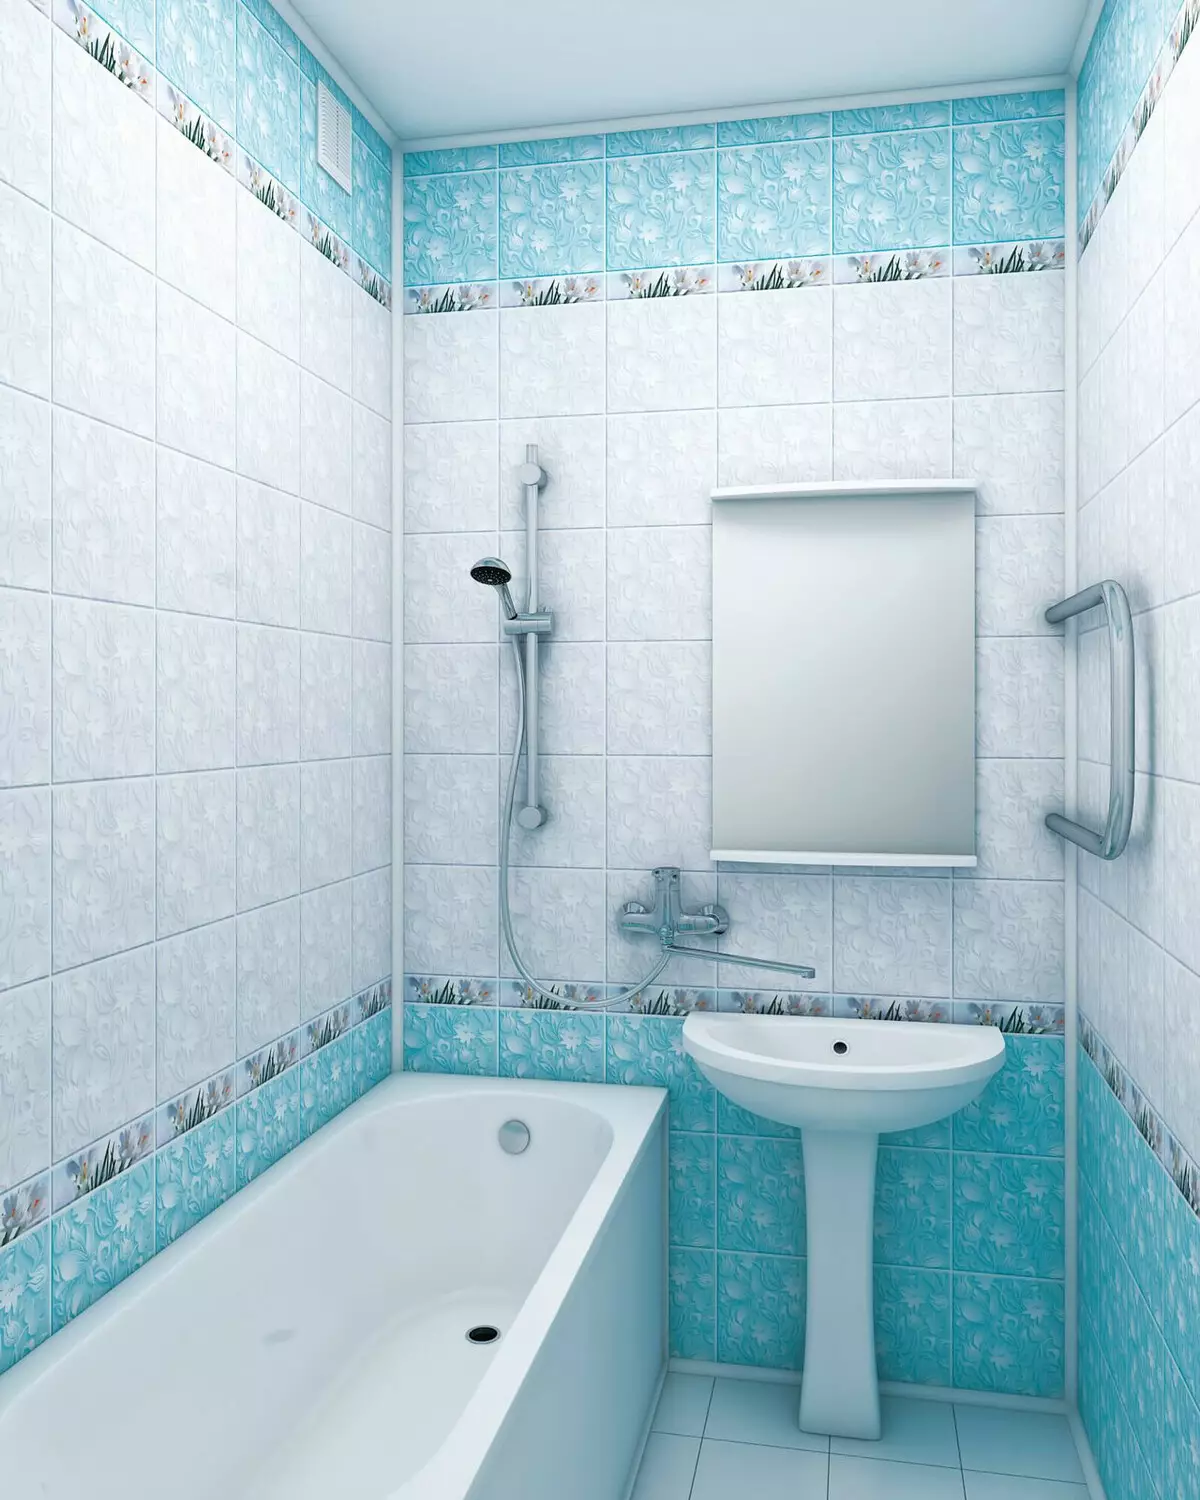 How to separate the walls in the bathroom other than tiles? 65 photos: design options. Wallpapers and other finishing materials. What can be sewn and wall instead of tile? 10108_41